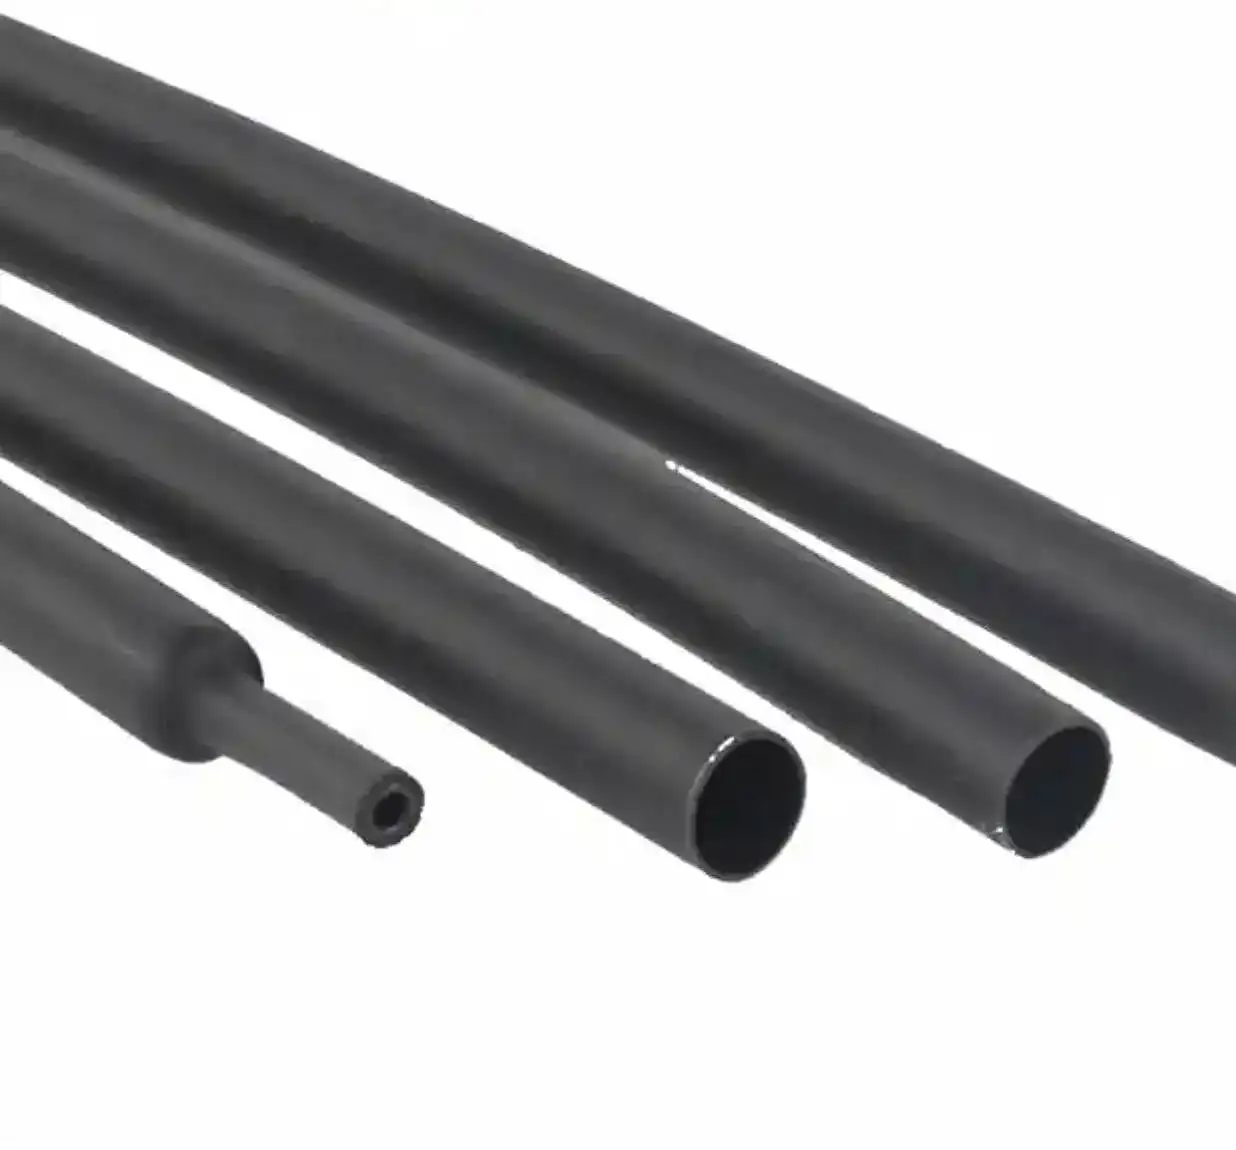 What is heat-shrink tubing and how is it used